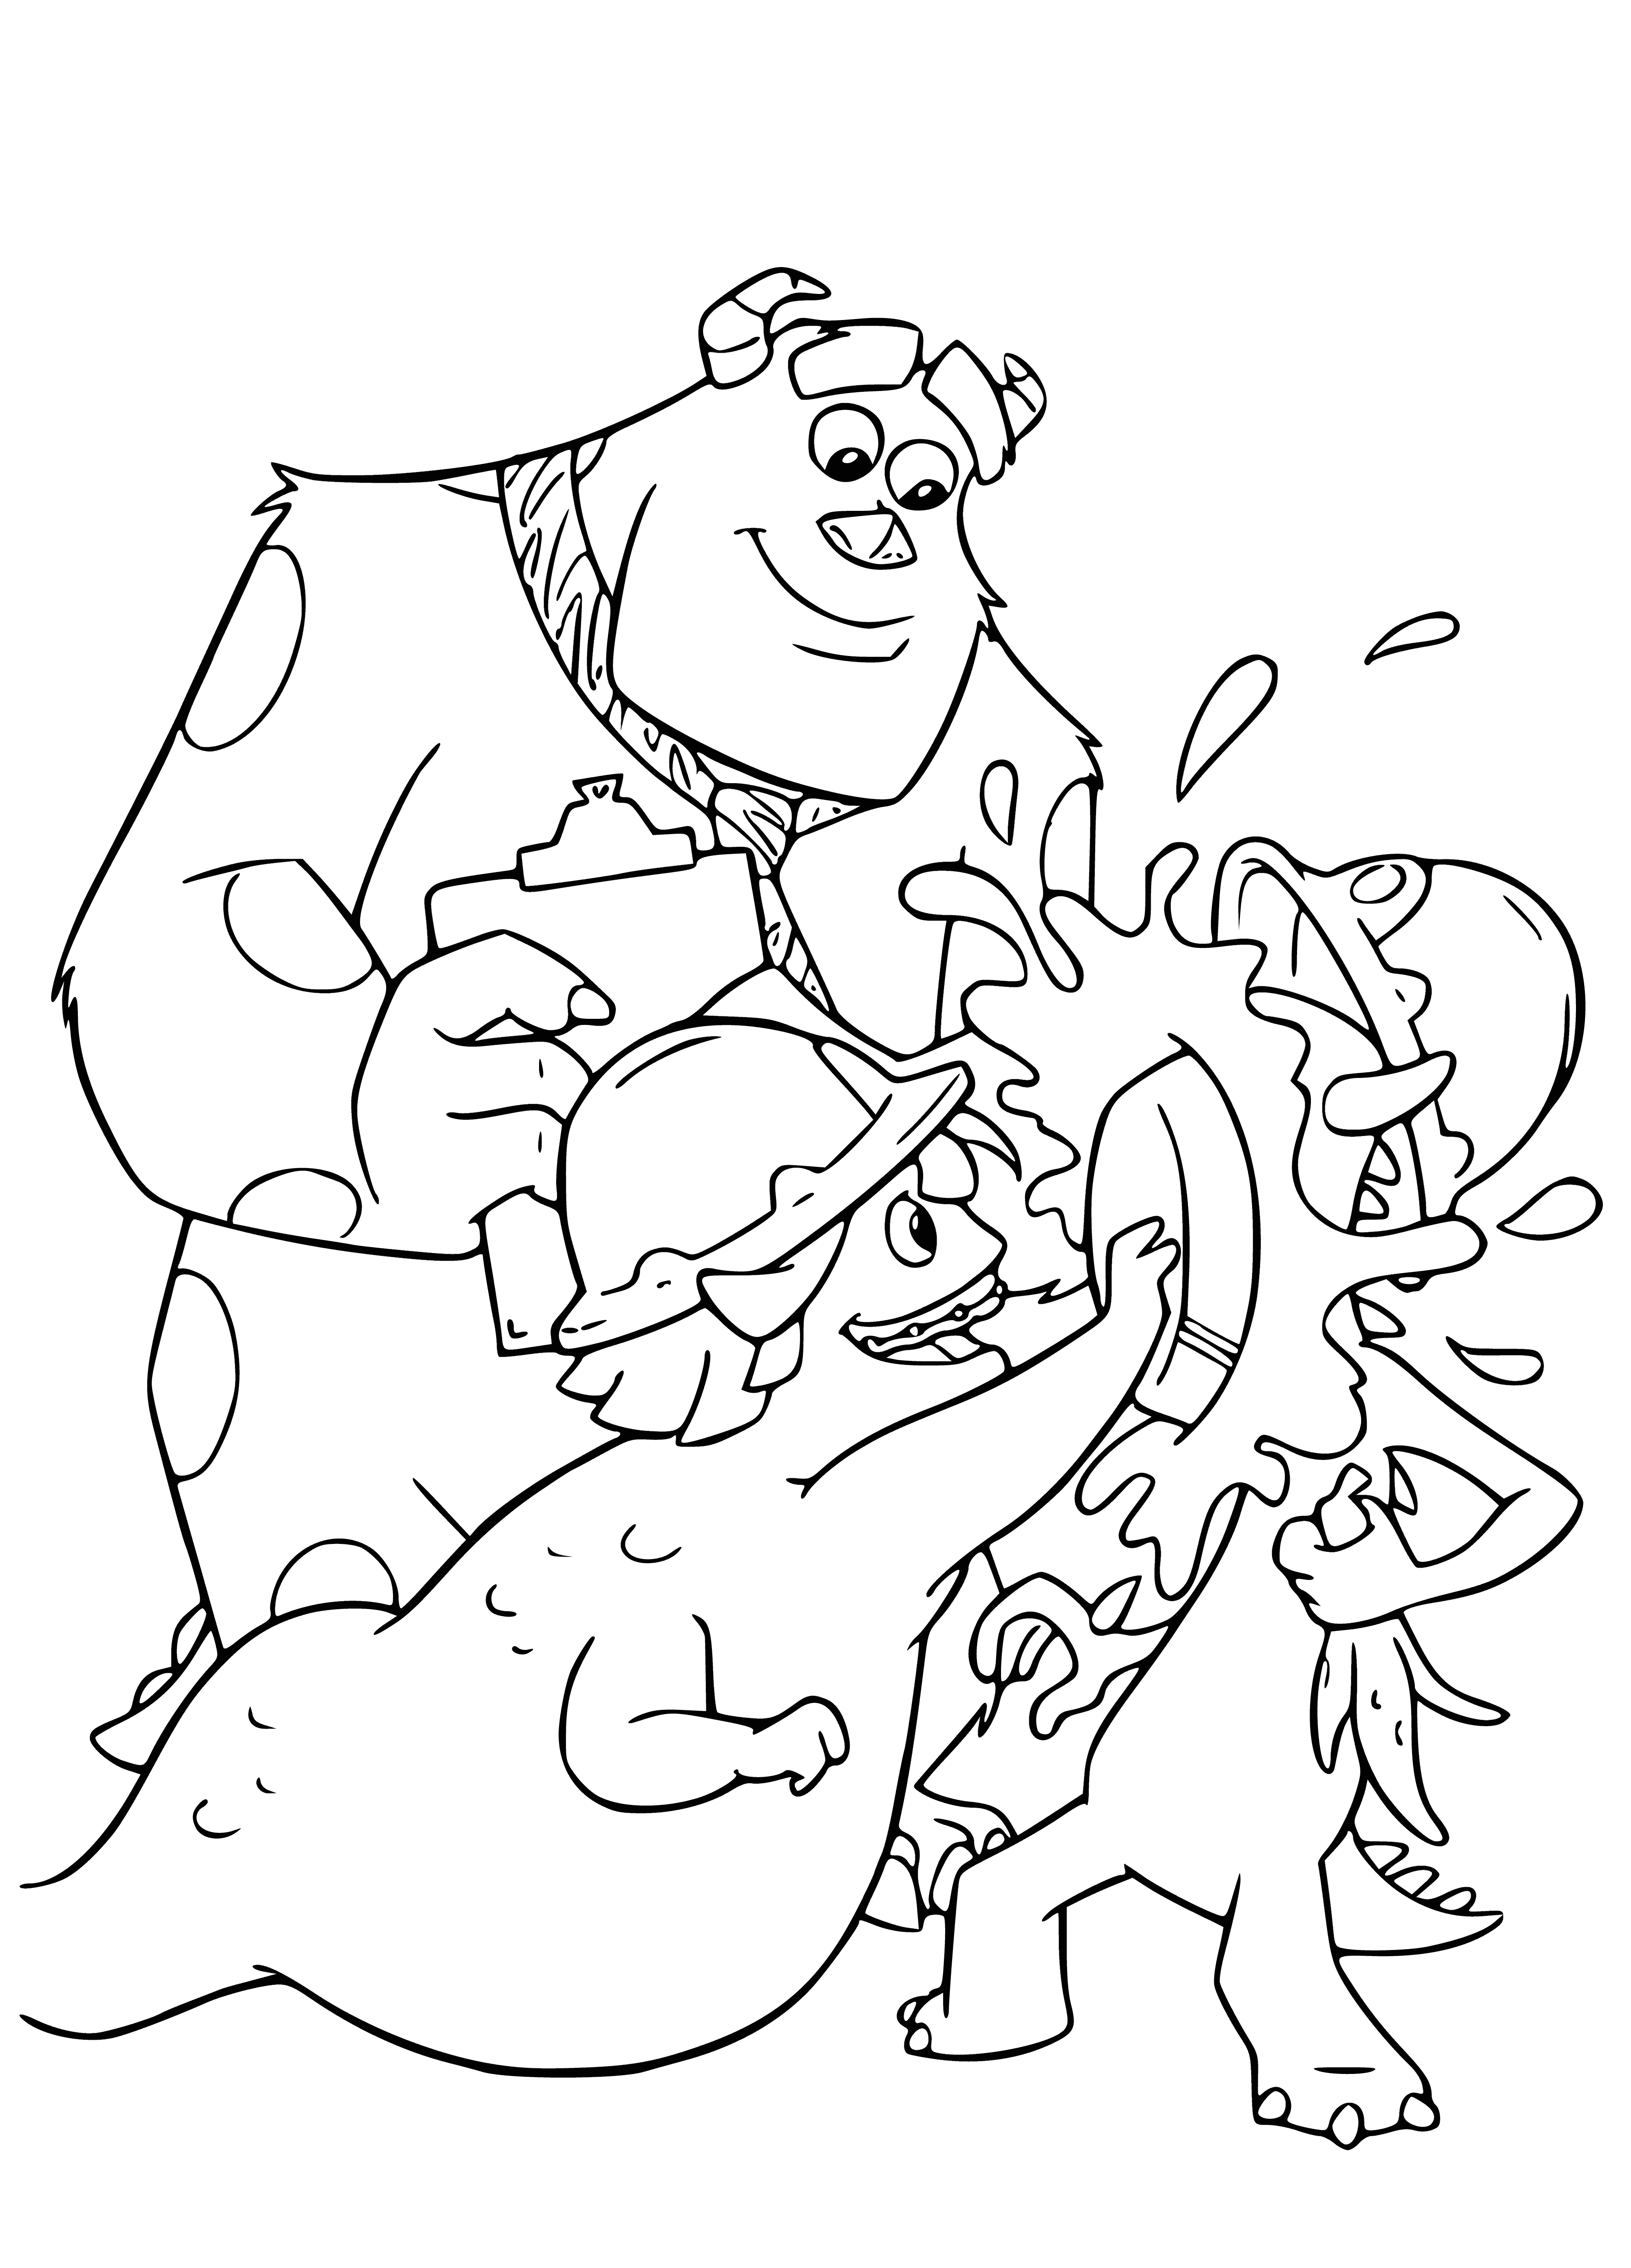 coloring page: Monsters Sulley & Mike help power factory by collecting screams of sleeping human children at night by entering their bedrooms.